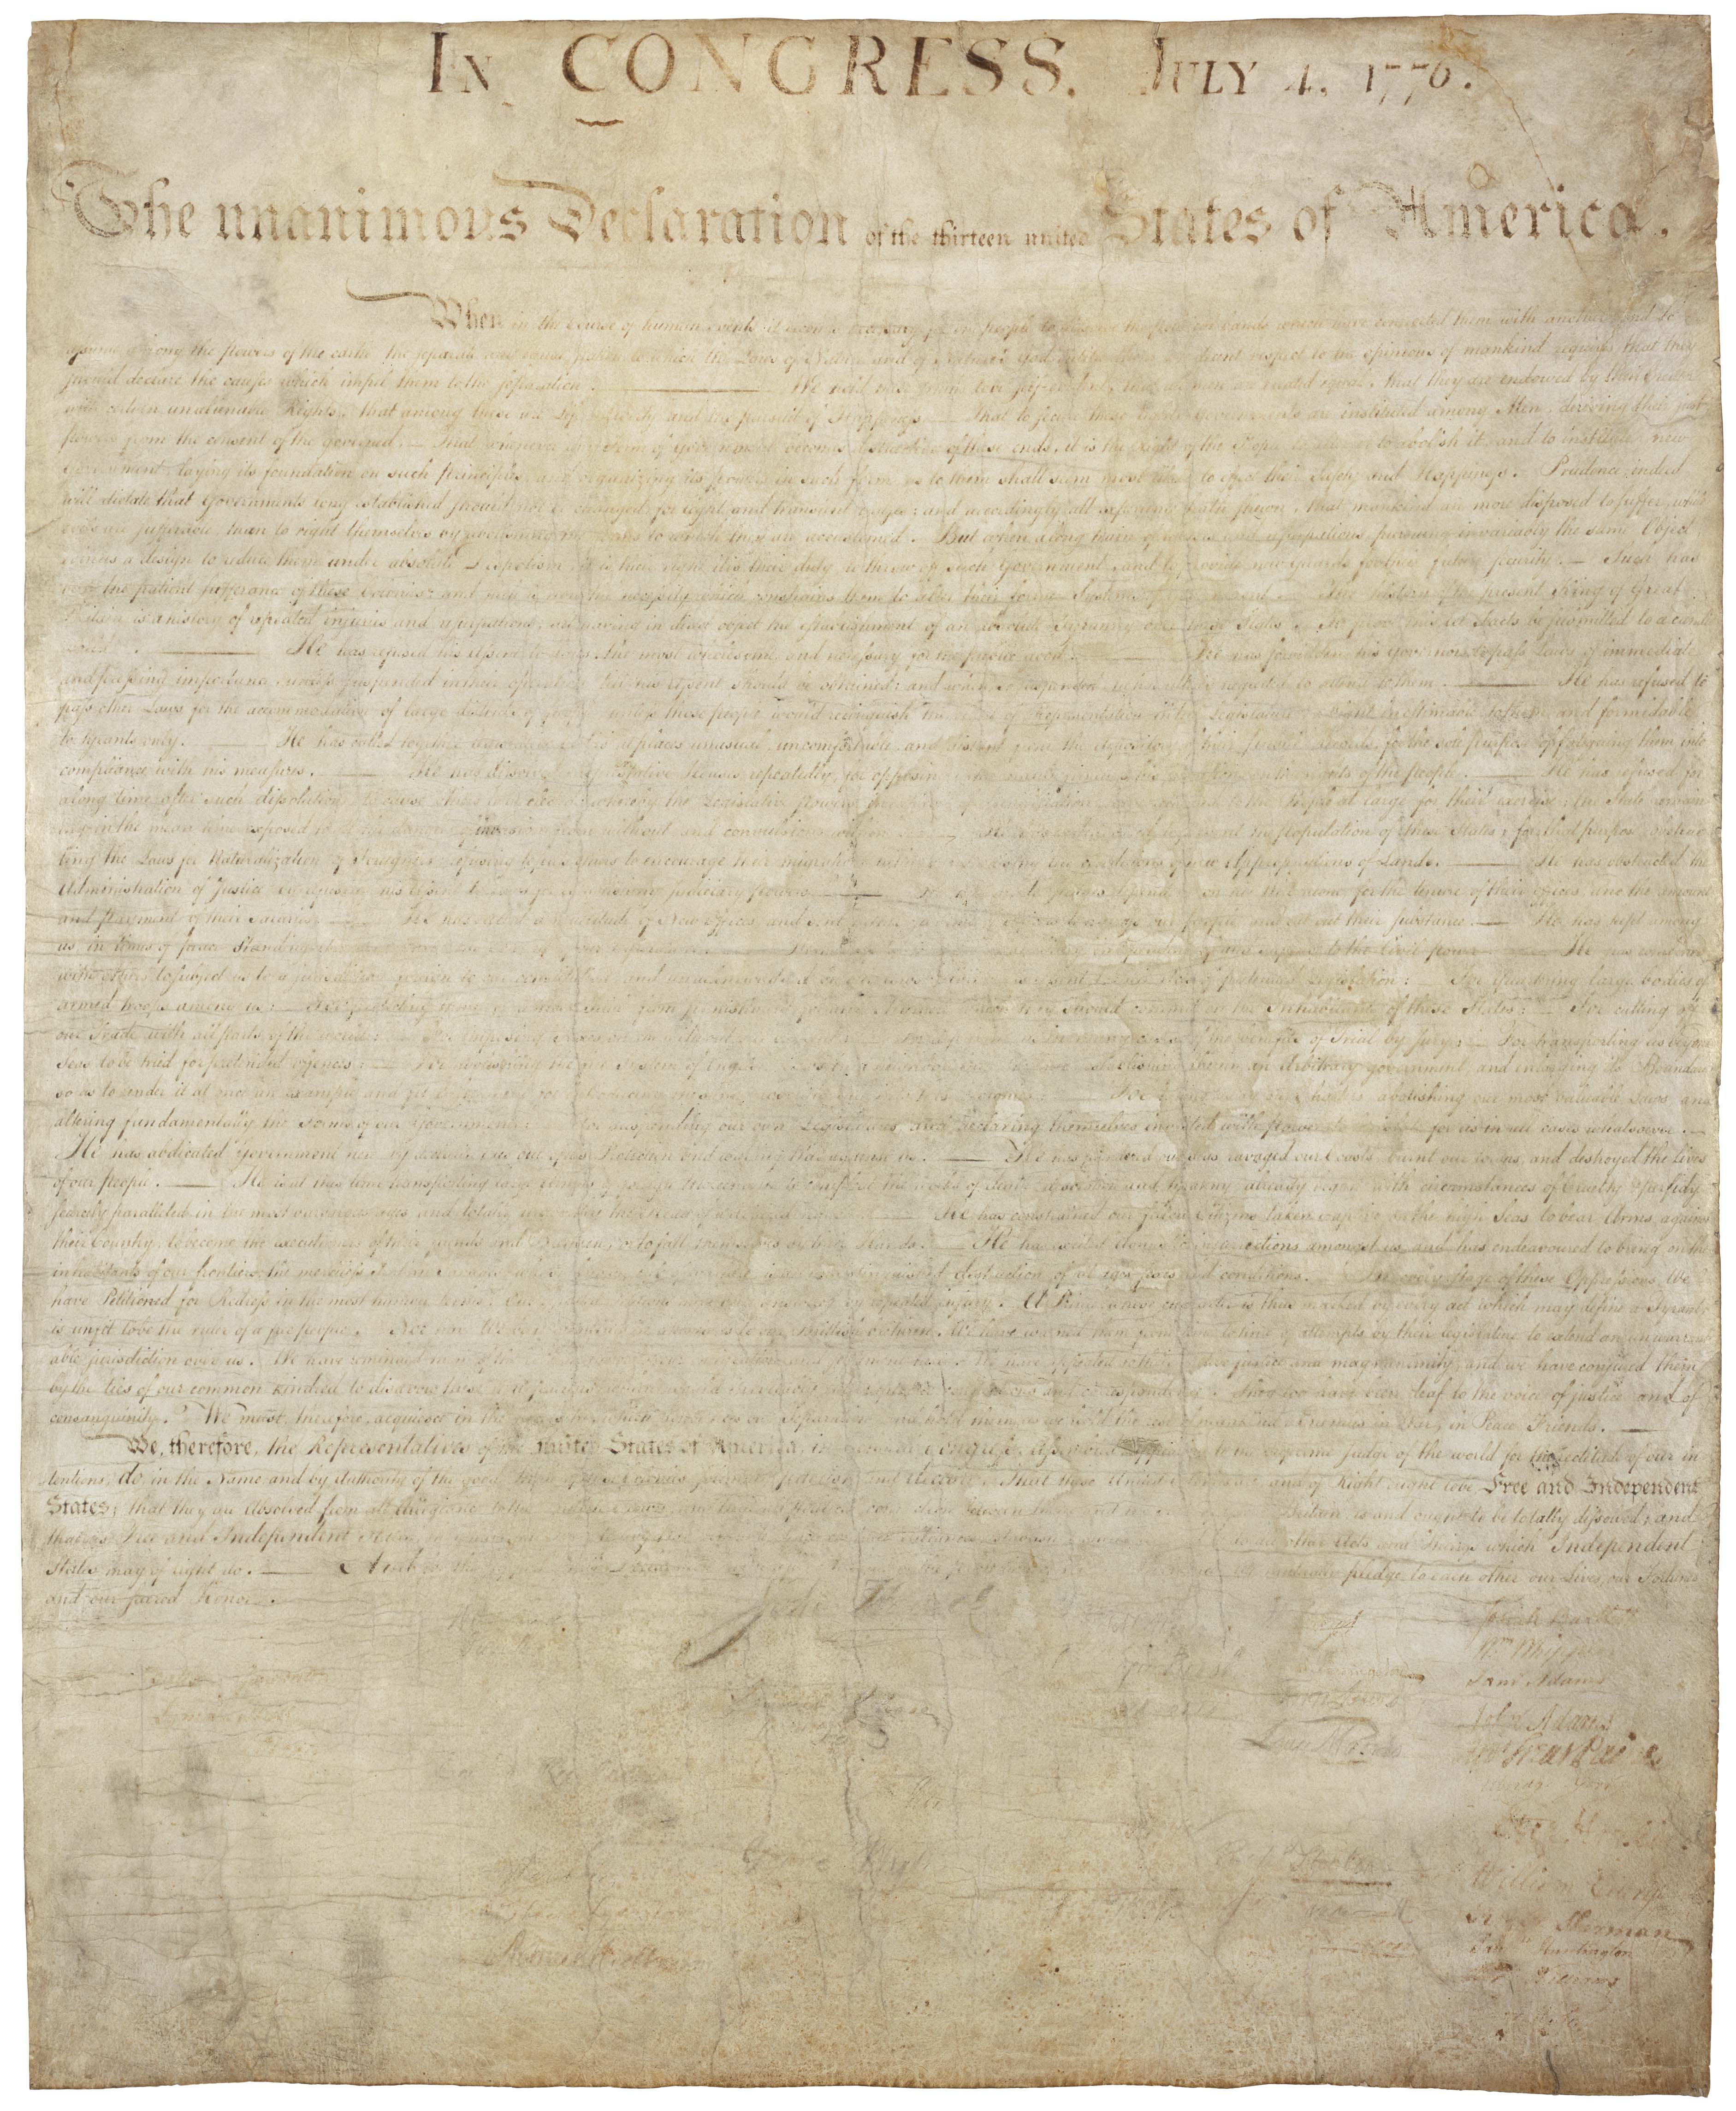 The Declaration of Independence | National Archives